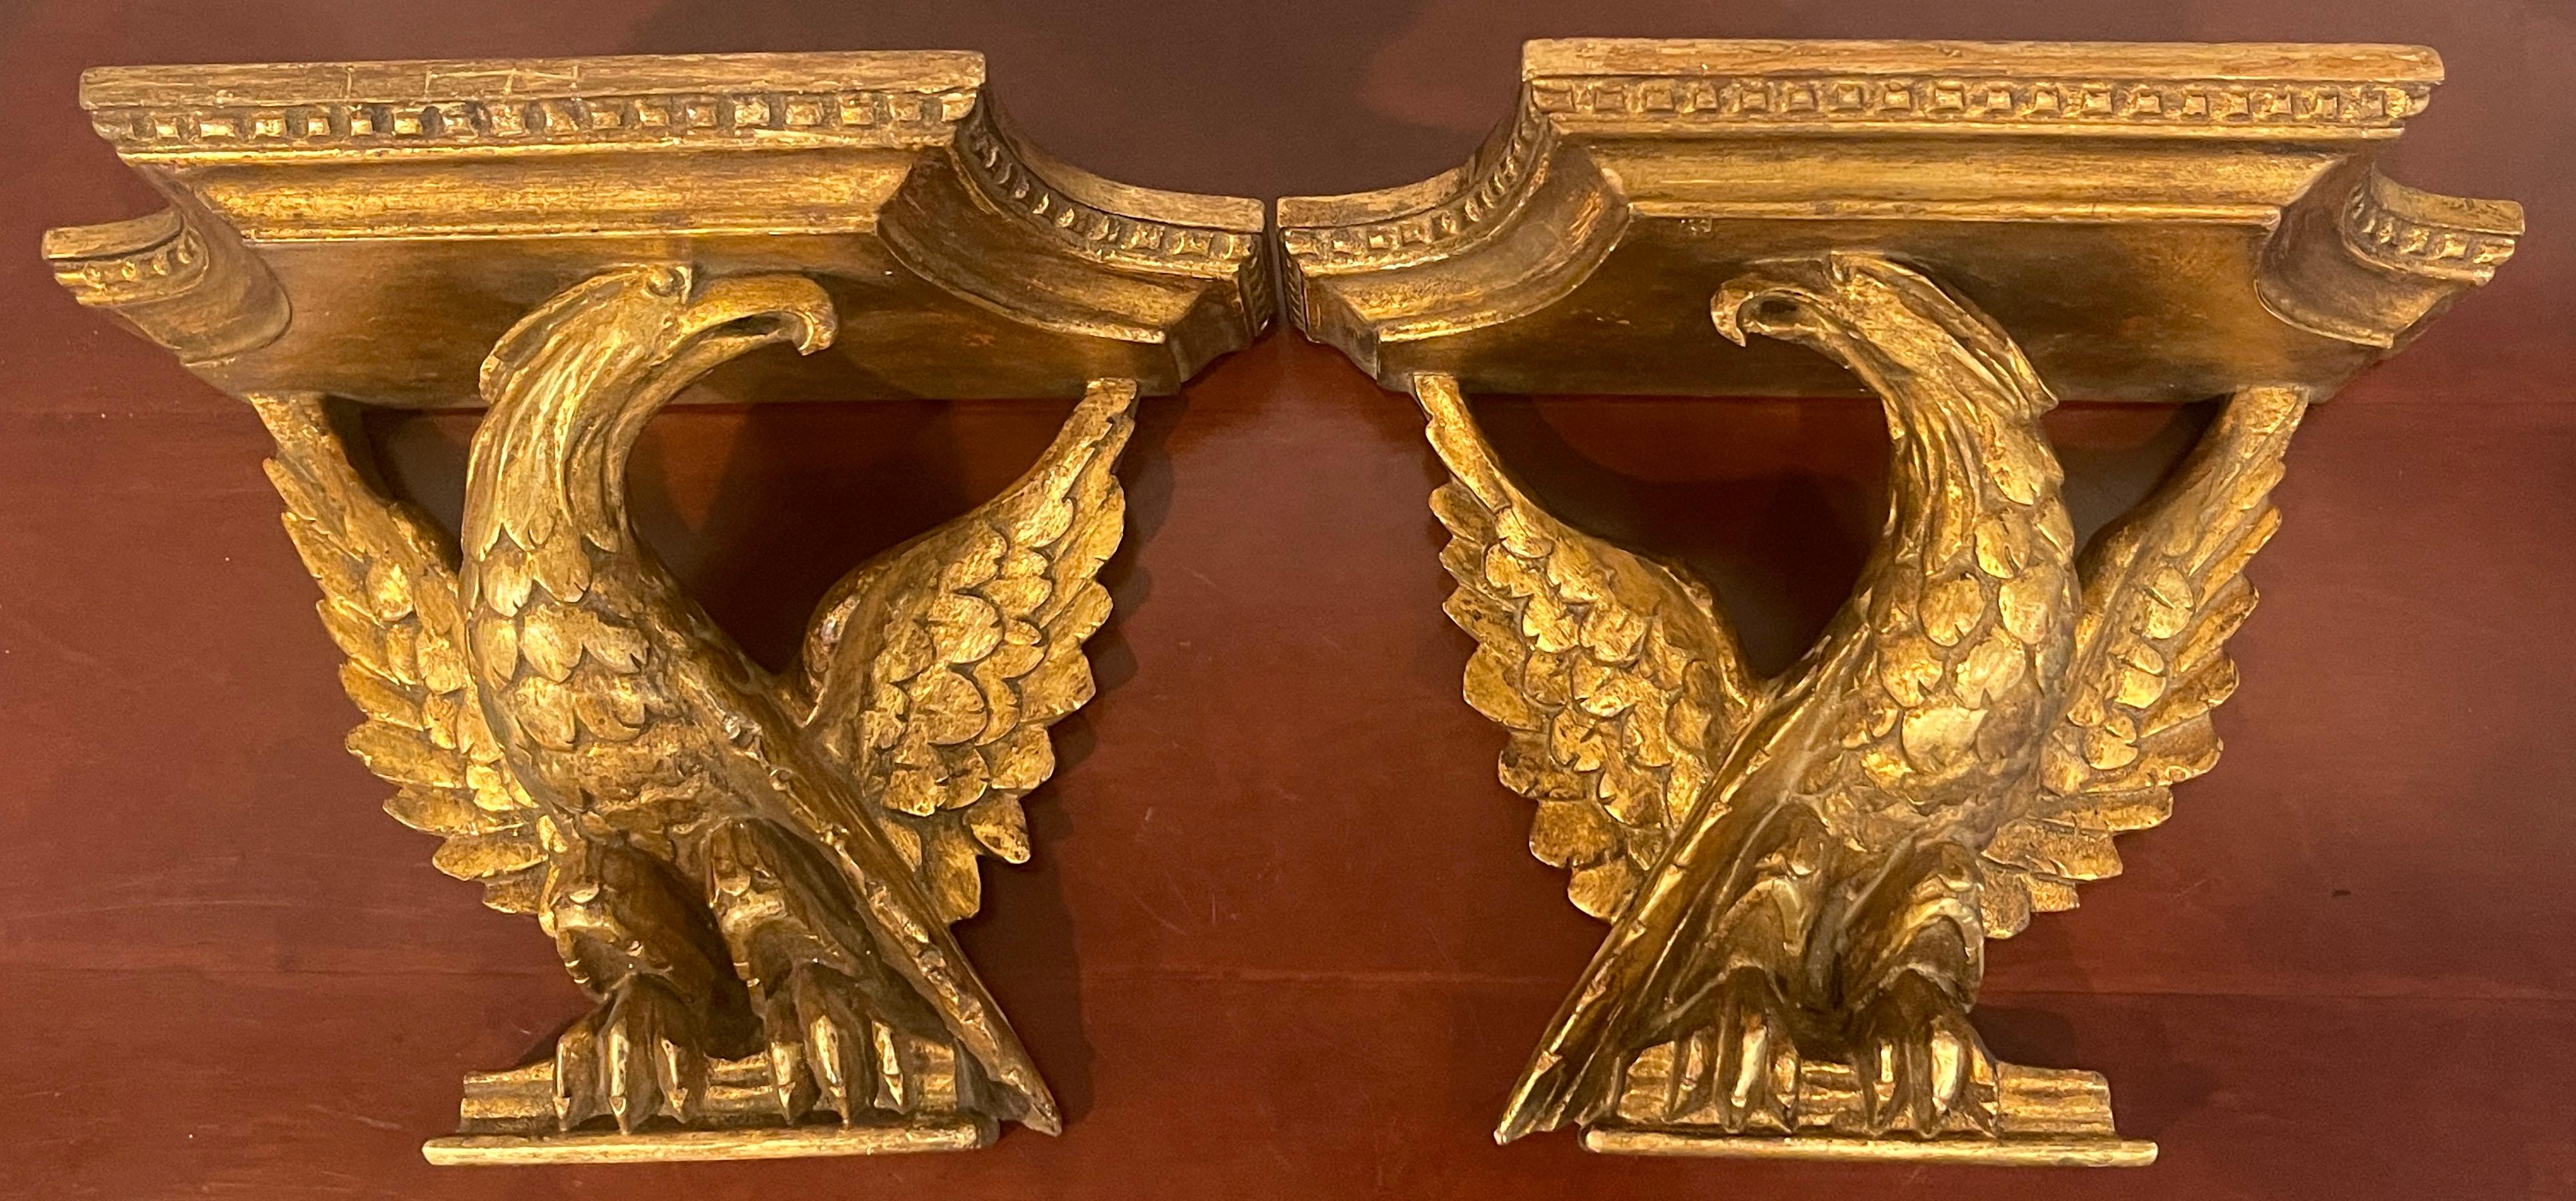 Pair of Italian neoclassic carved giltwood eagle motif wall shelves, each one finely carved of a sitting eagle with outstretched wings. One facing right, the other facing left. With a rectangular tops measuring 11